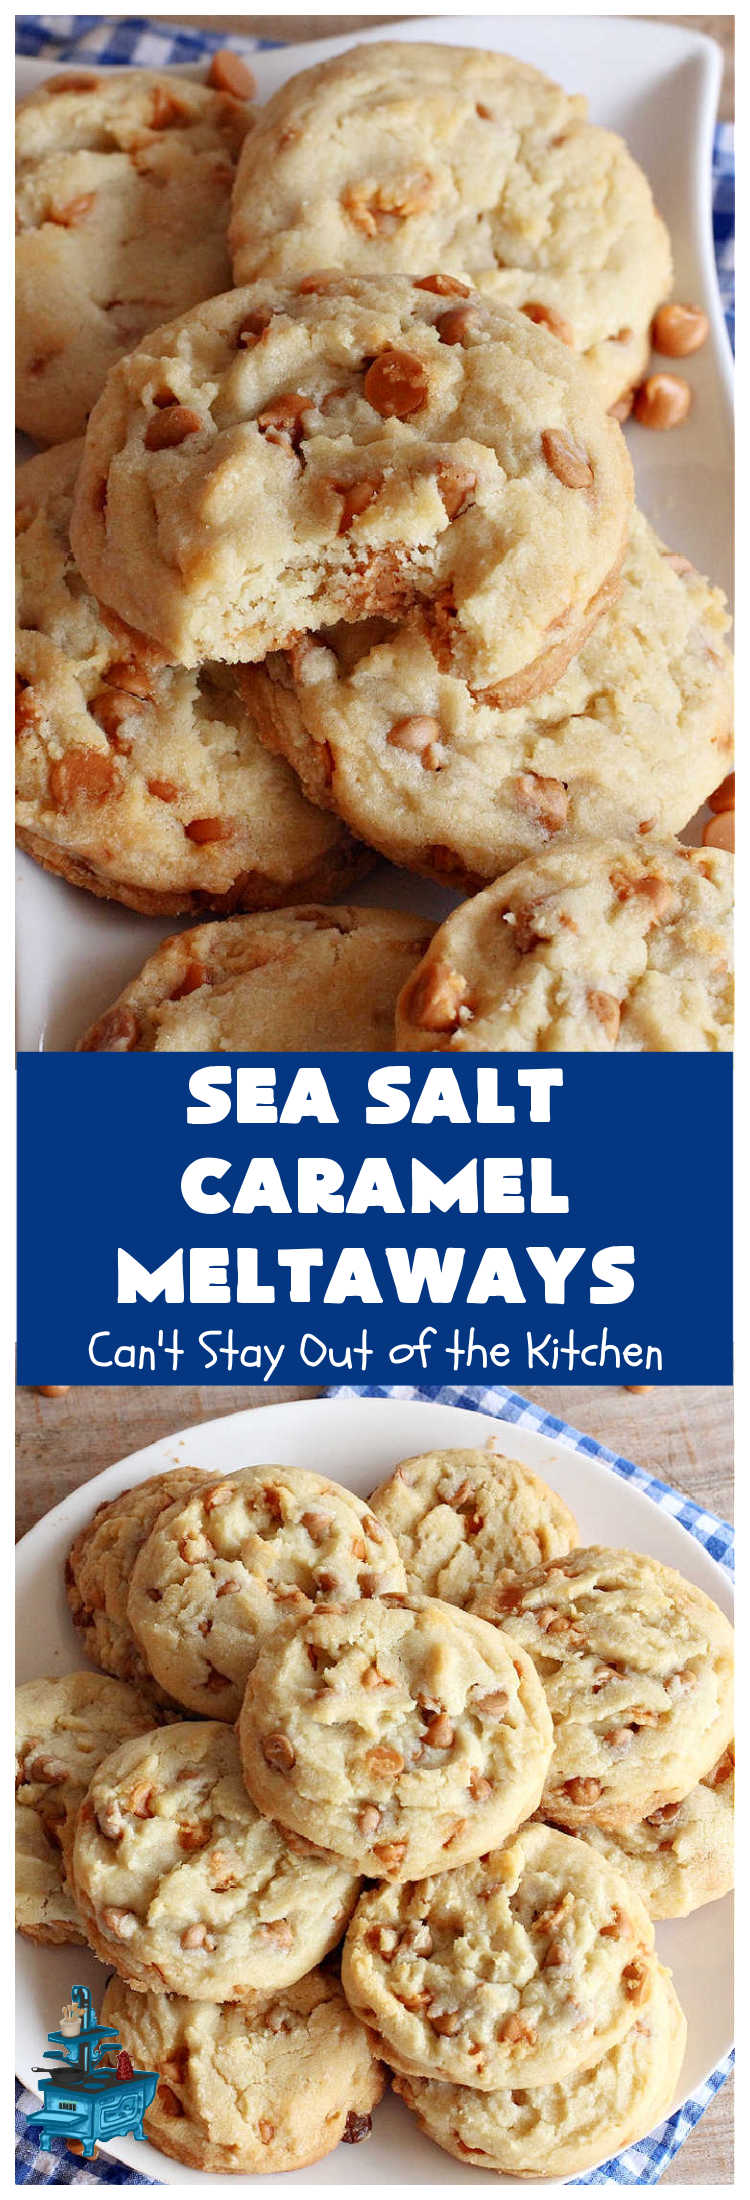 Sea Salt Caramel Meltaways | Can't Stay Out of the Kitchen | these melt-in-your-mouth #cookies are rich, decadent & divine! Every mouthful is irresistible & will make you swoon! If you enjoy #SeaSaltCaramelChips this #dessert is for you. Perfect for #tailgating or office parties, potlucks, backyard BBQs & any family get-together. #meltaways #SeaSaltCaramelMeltaways #caramel #CaramelDessert